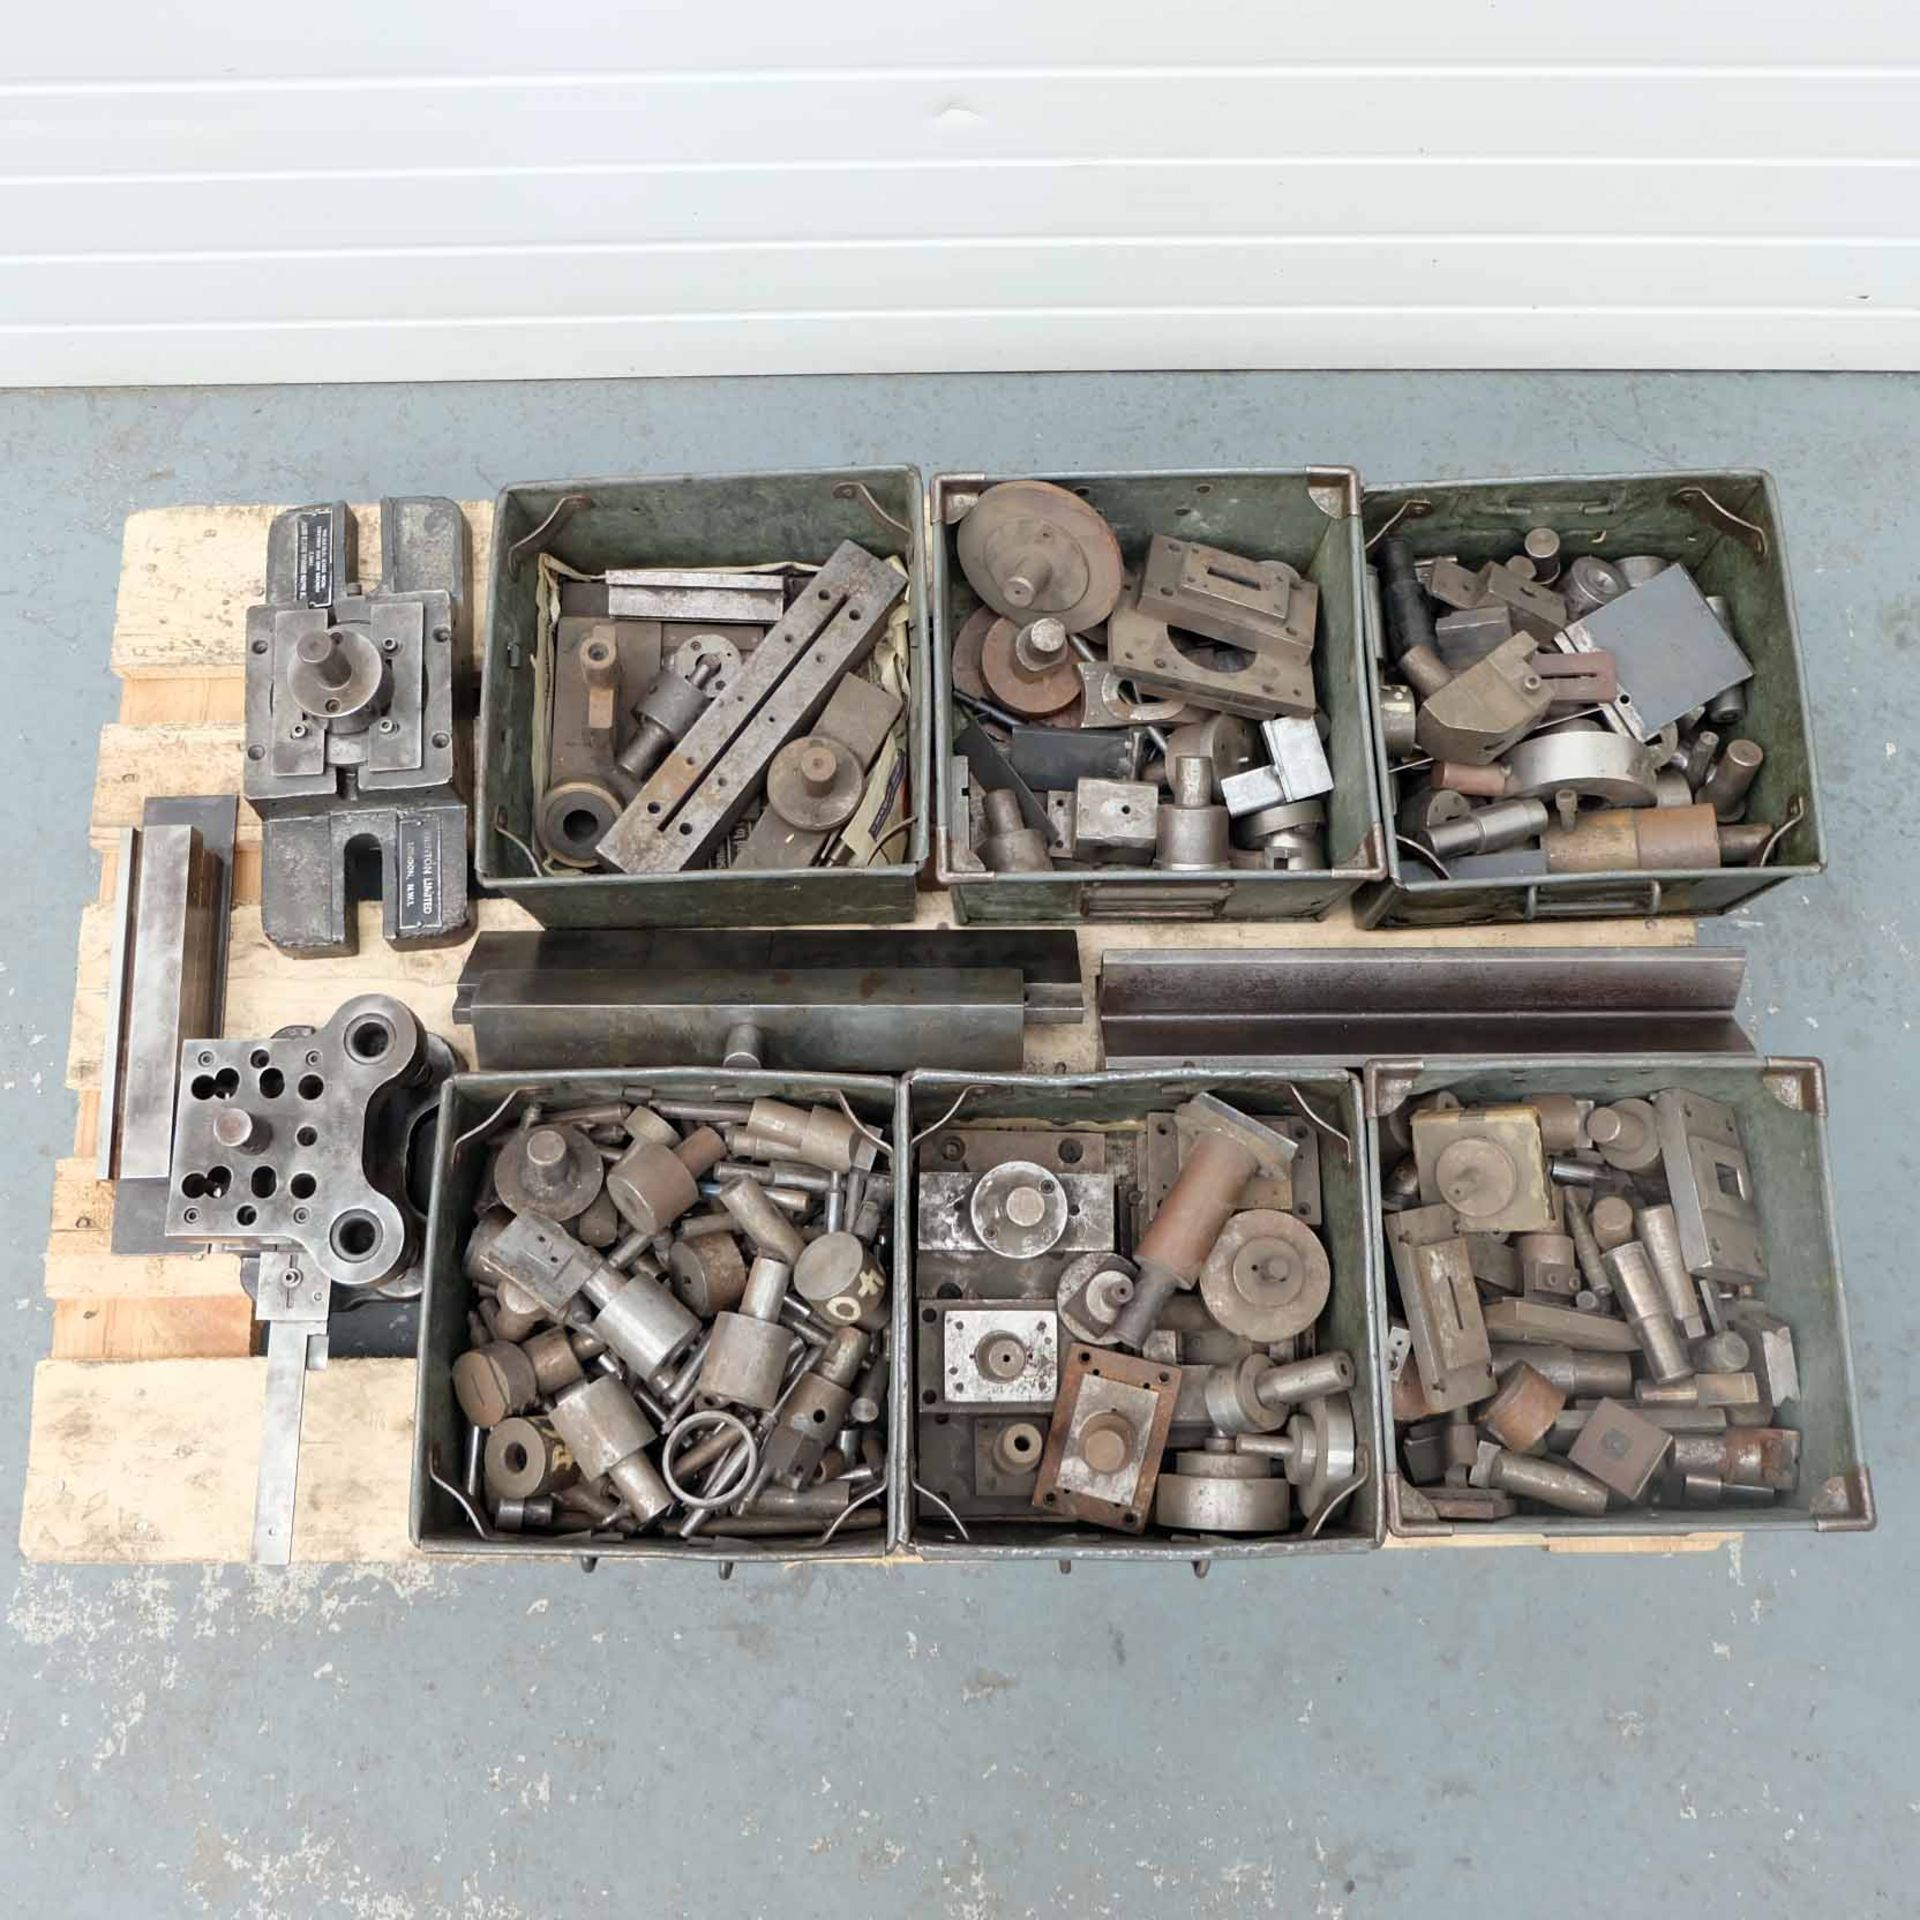 Quantity of Press / Fly Press Tooling. Various Sizes & Shapes. Top & Bottom Tooling. 6 x Boxes.